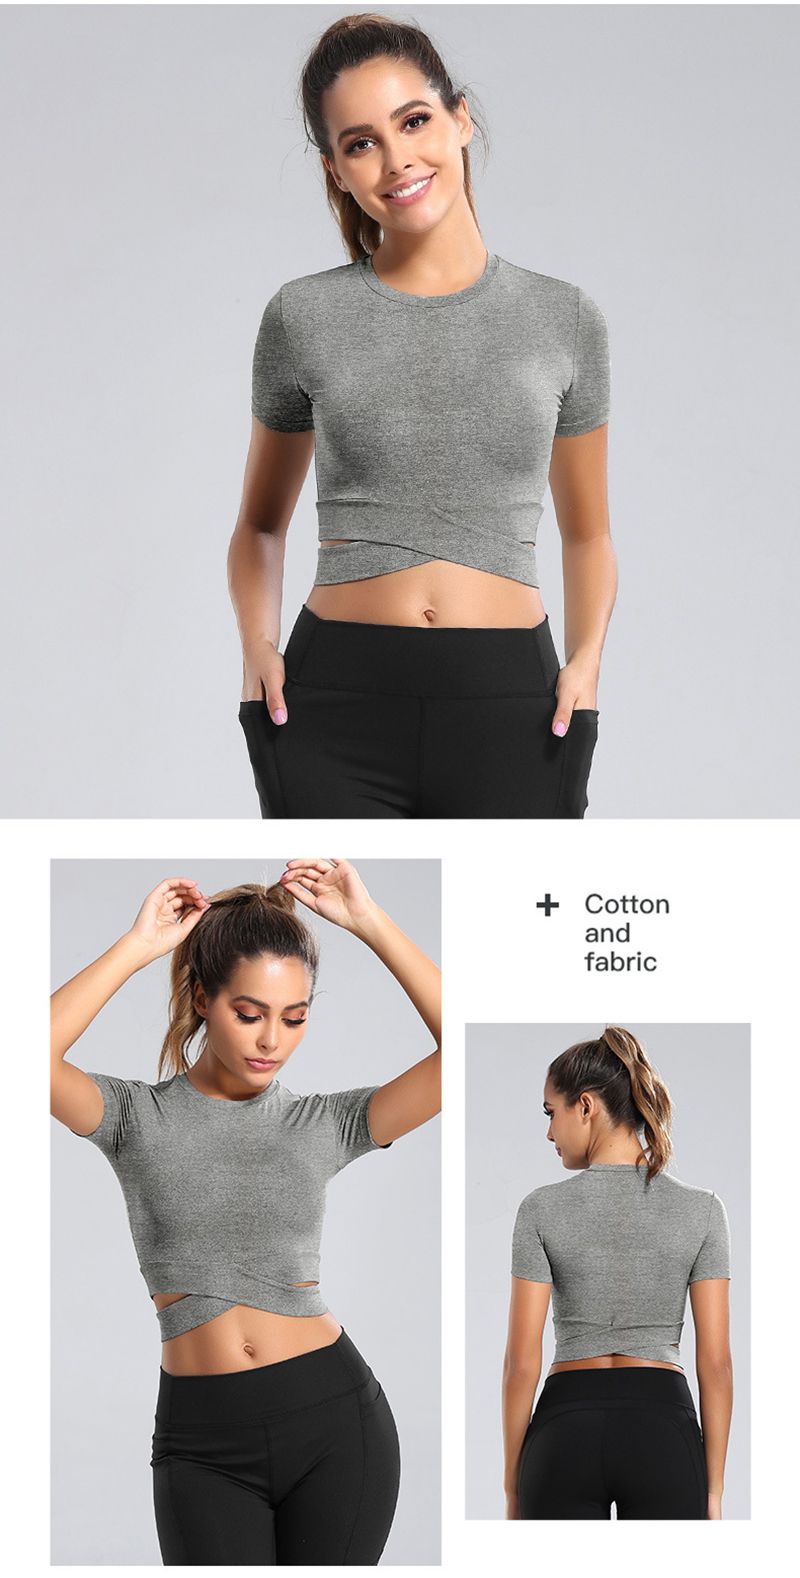 Slim Fit Criss Cross Yoga Short Sleeve Cropped Tee Gym Workout Top